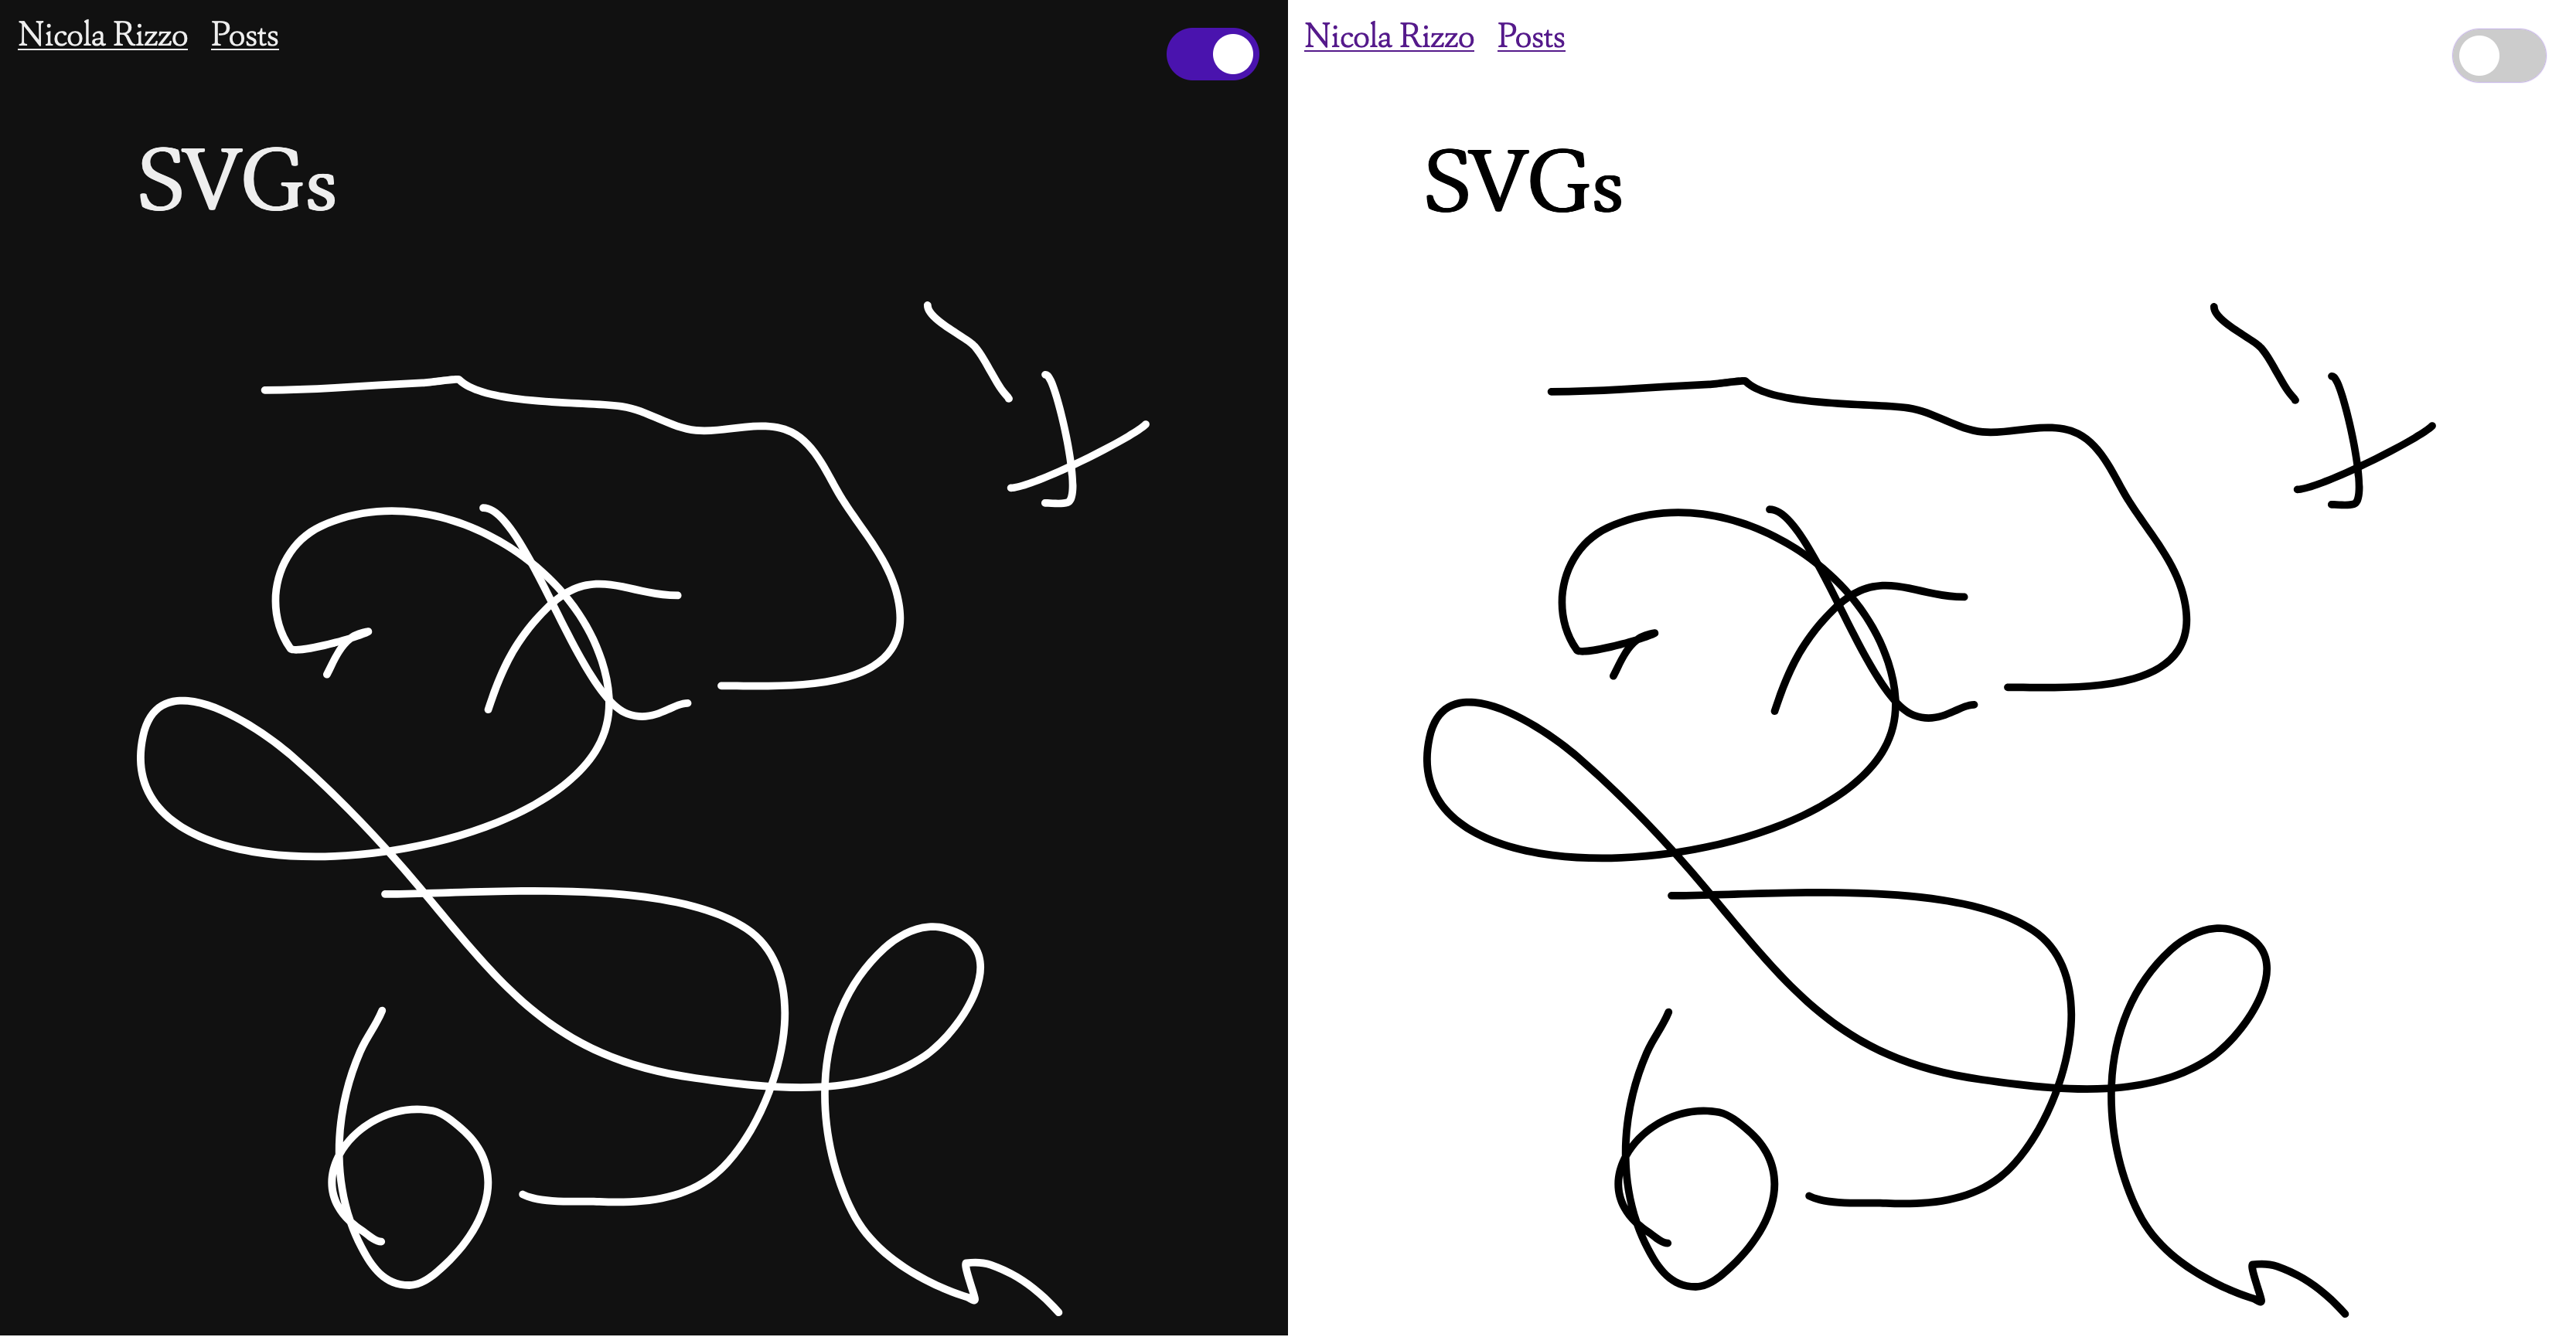 The same SVG file with the dark mode option enabled and disabled